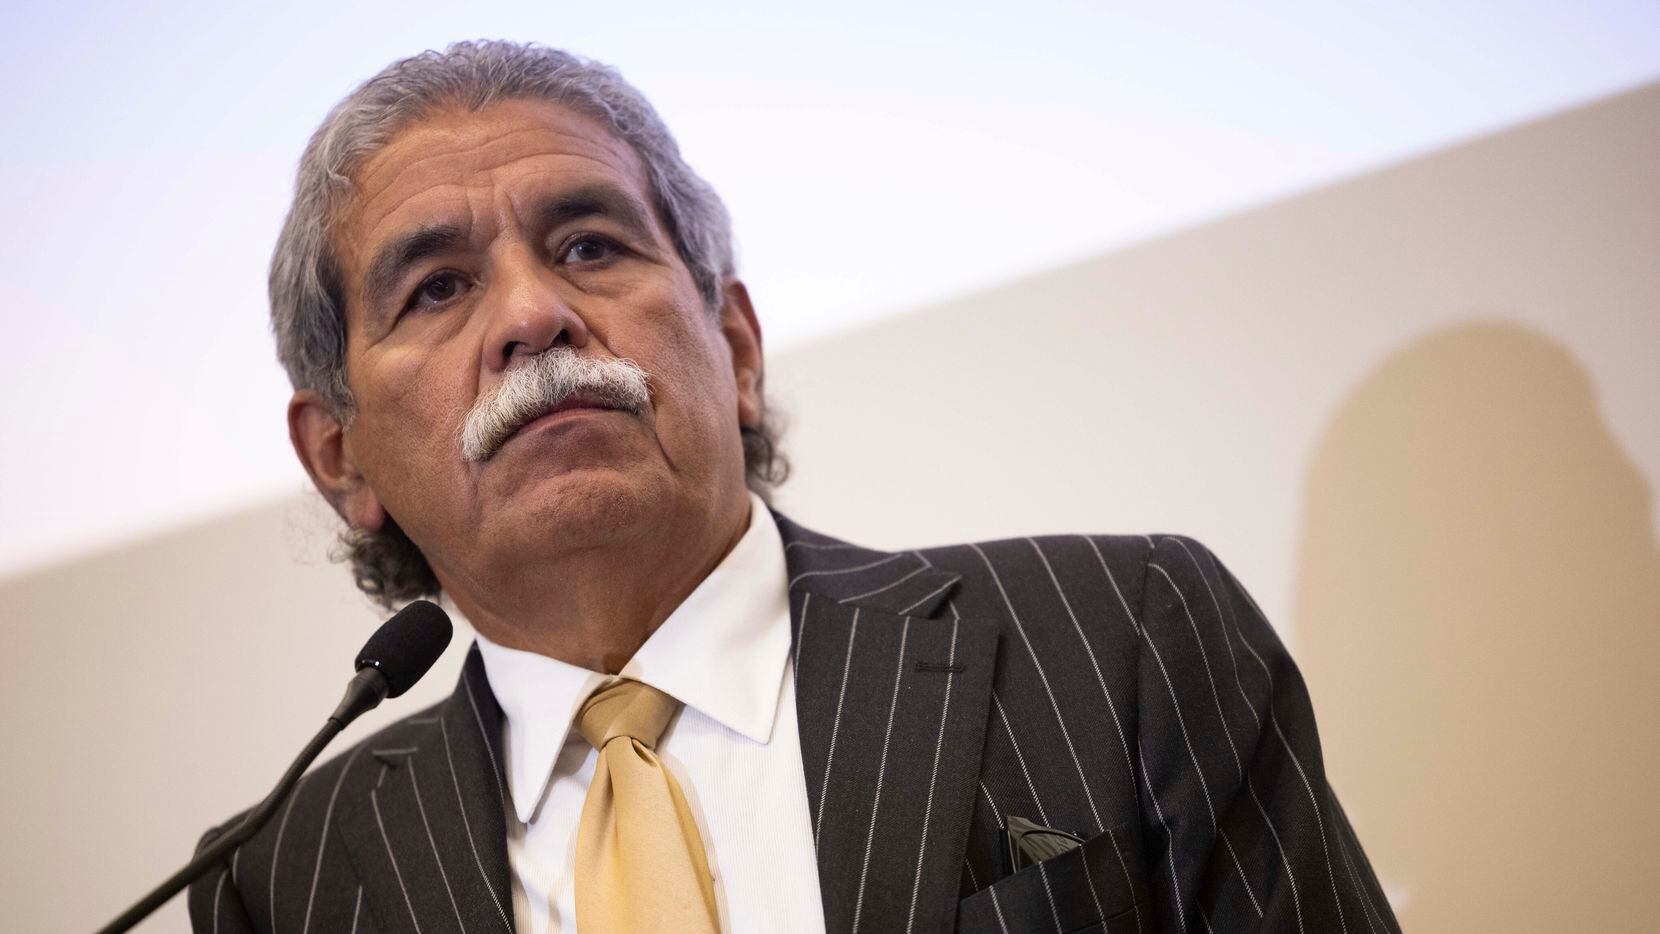 “It’s difficult to run against an incumbent," said Michael Hinojosa, former Dallas ISD...